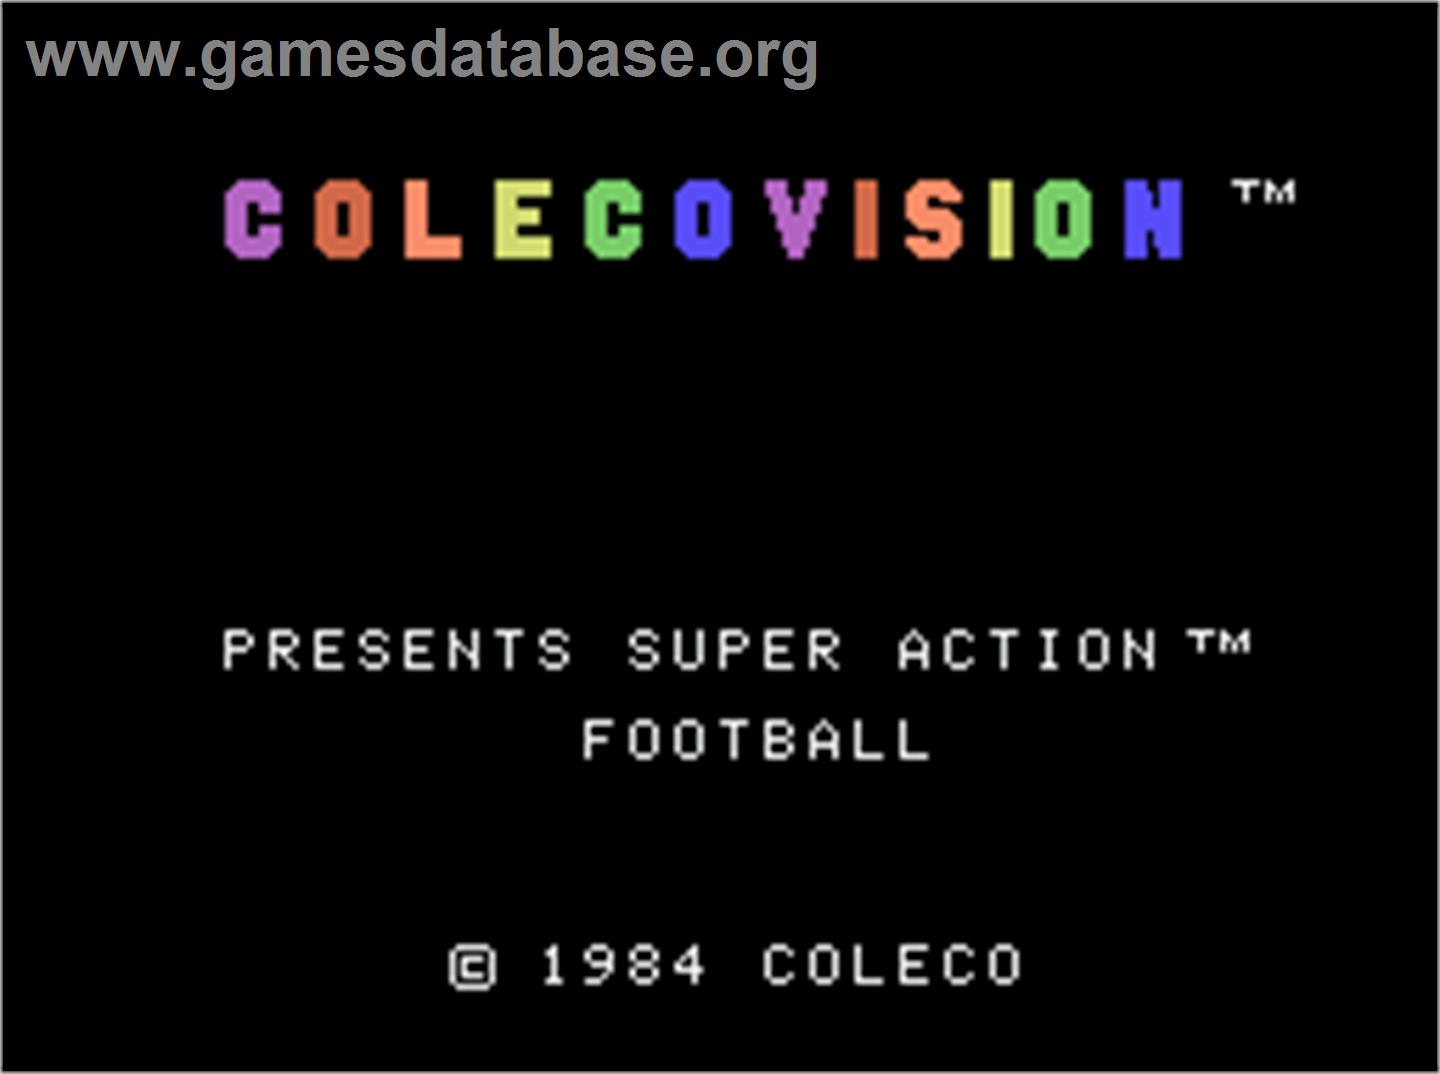 Super Action Football - Coleco Vision - Artwork - Title Screen